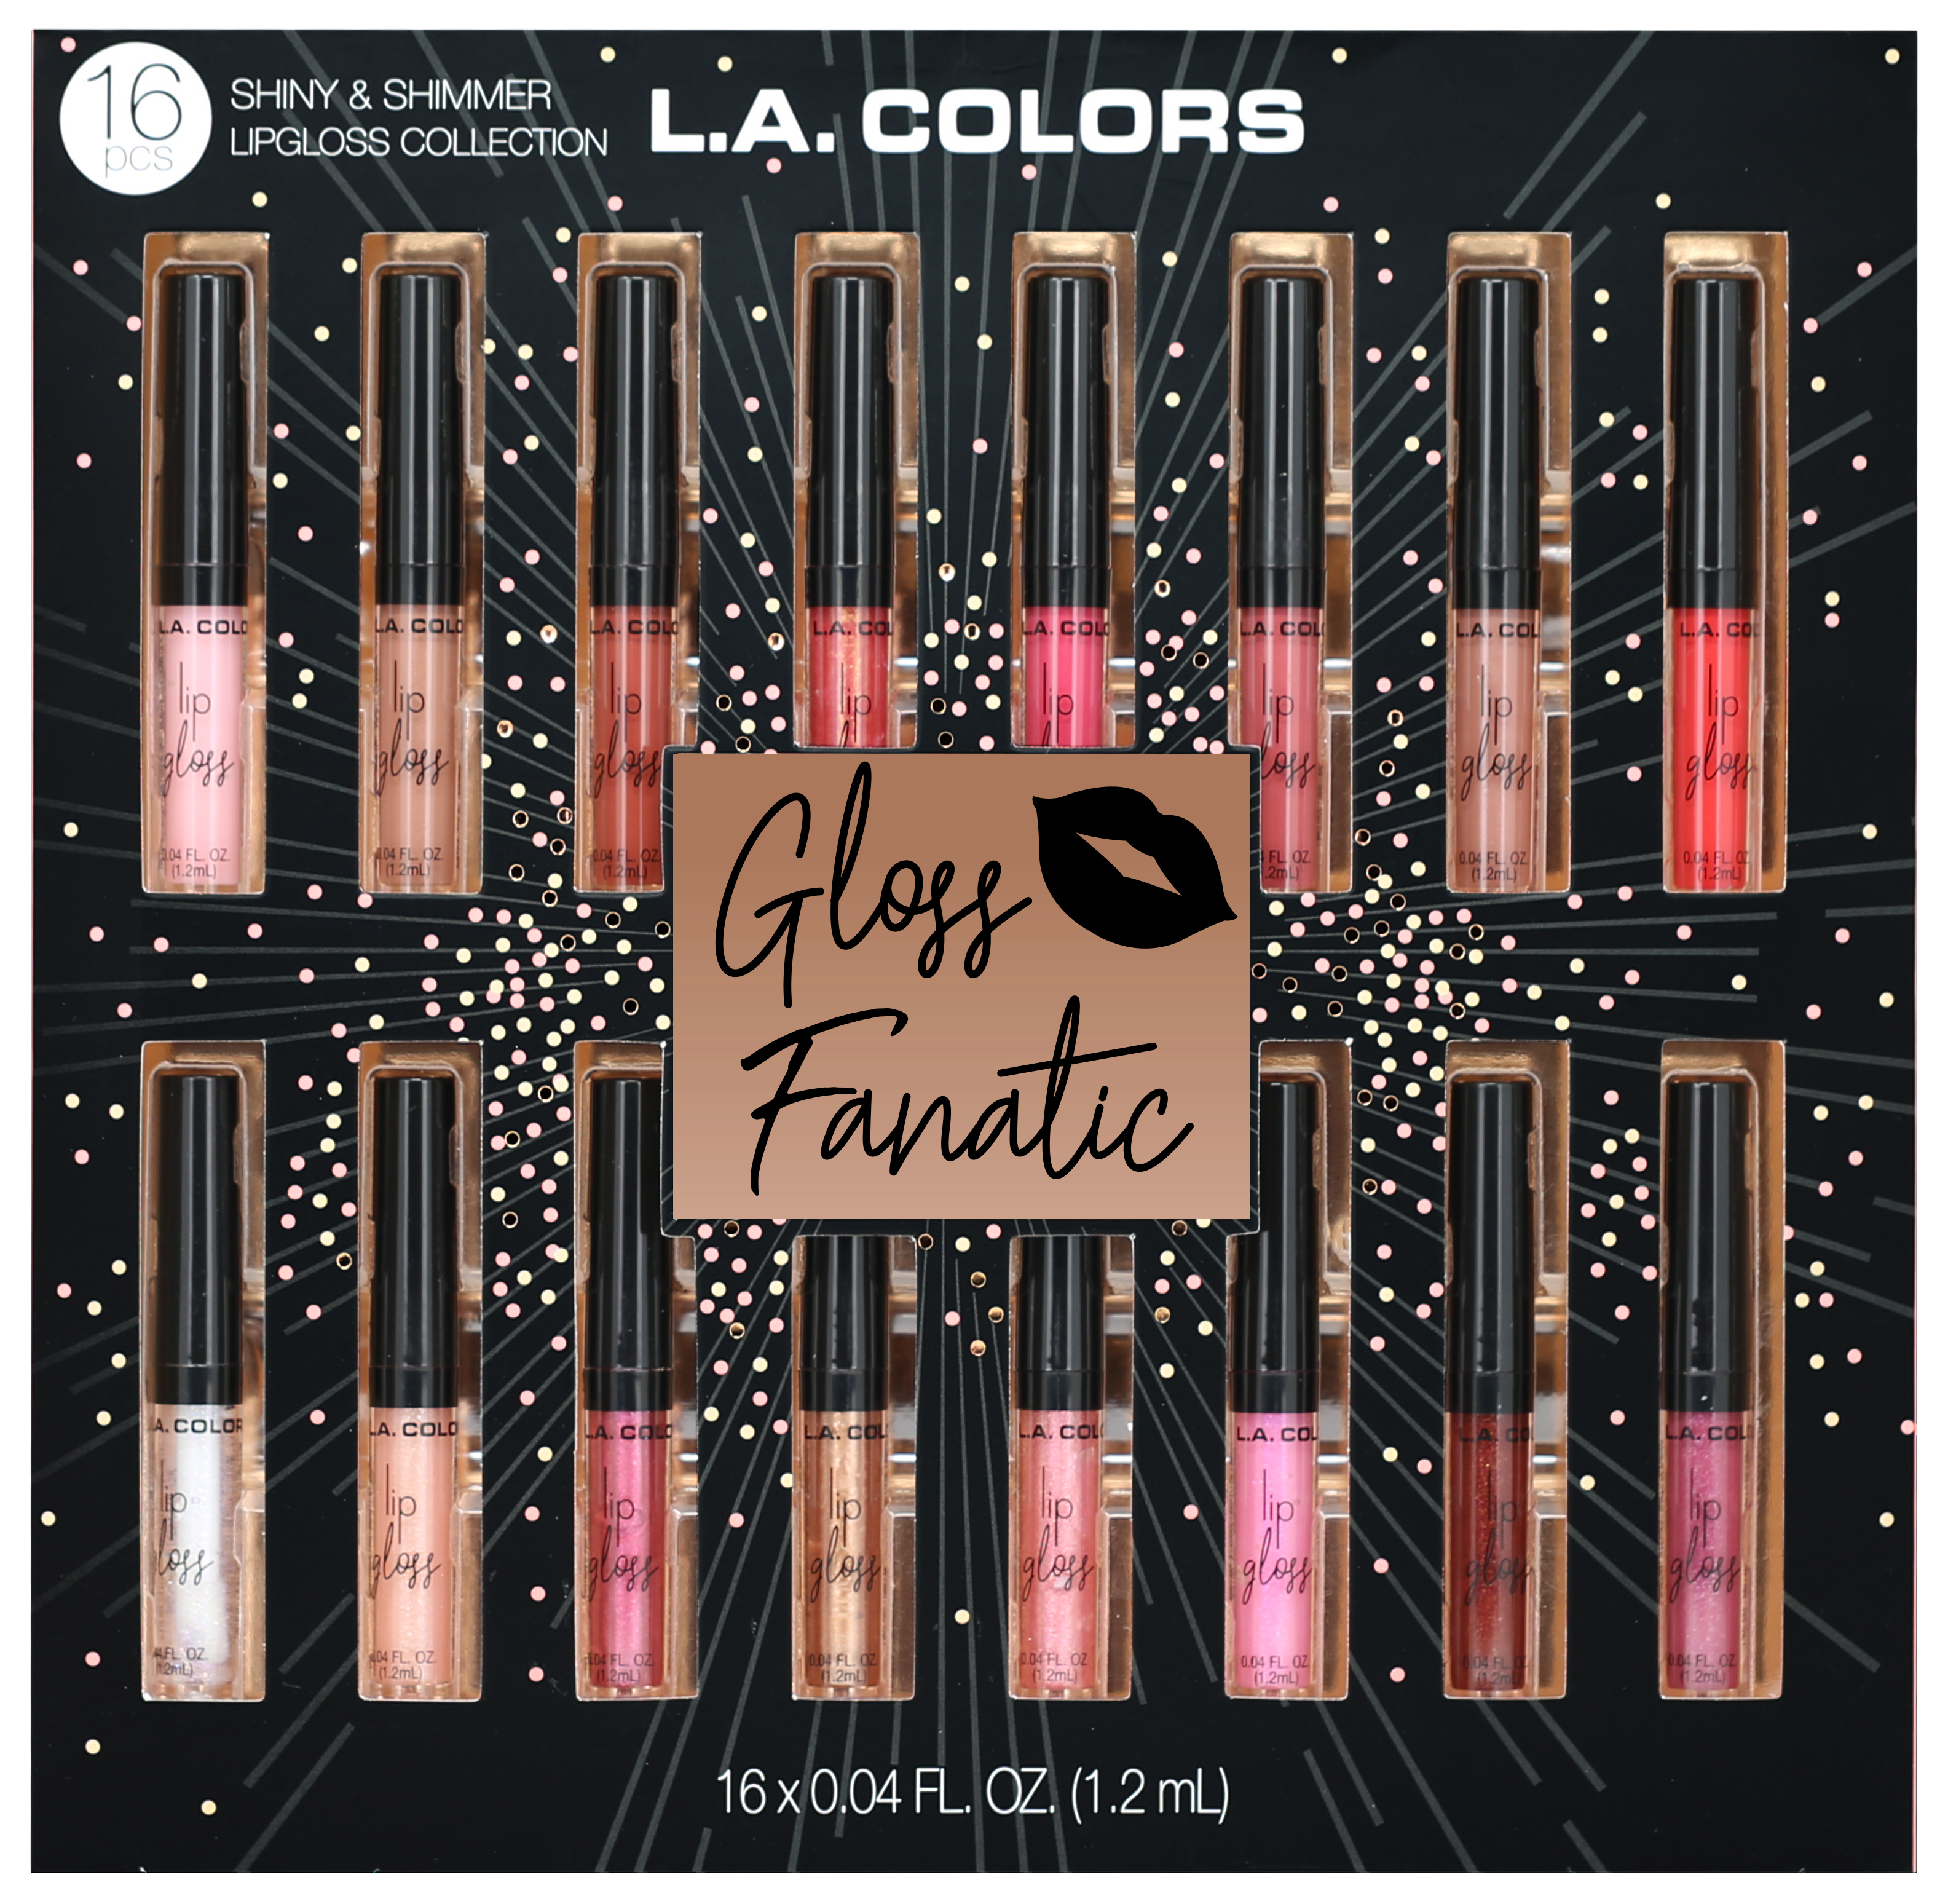 16-Piece L.A. COLORS Cosmetics Holiday Gloss Fanatic Lipgloss Collection Gift Set $7.14 + F/S w/ Walmart+ or on $35+